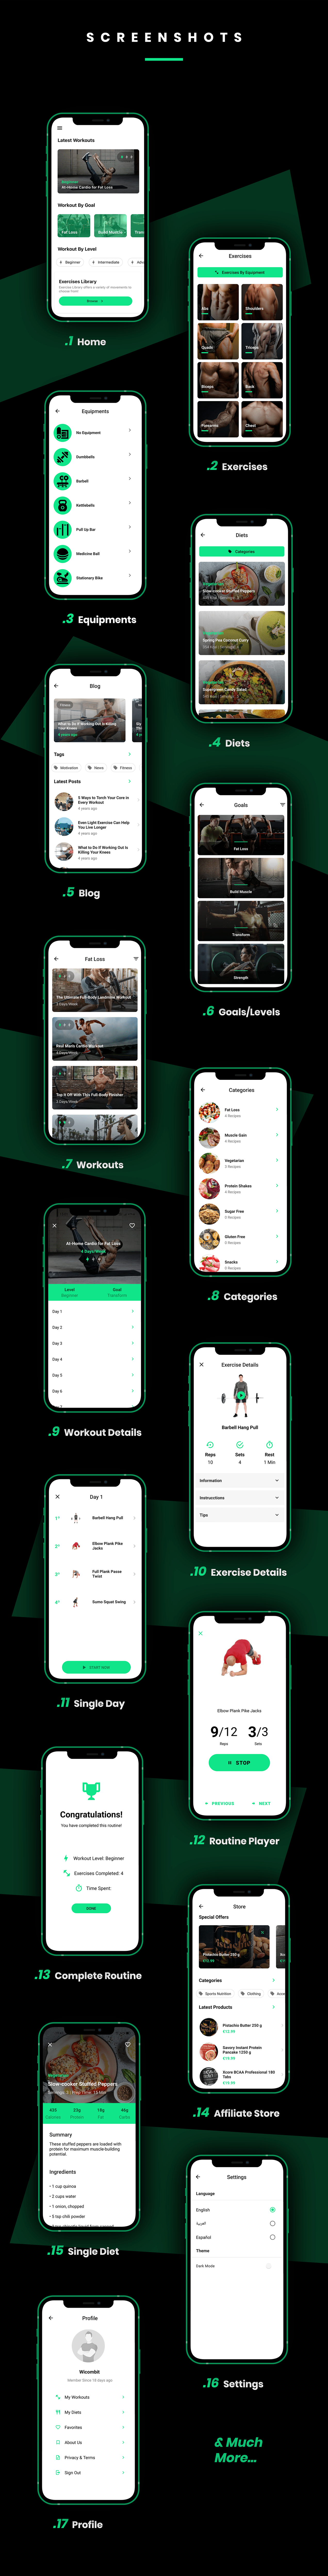 FitBasic - Complete React Native Fitness App + Multi-Language + RTL Support - 4